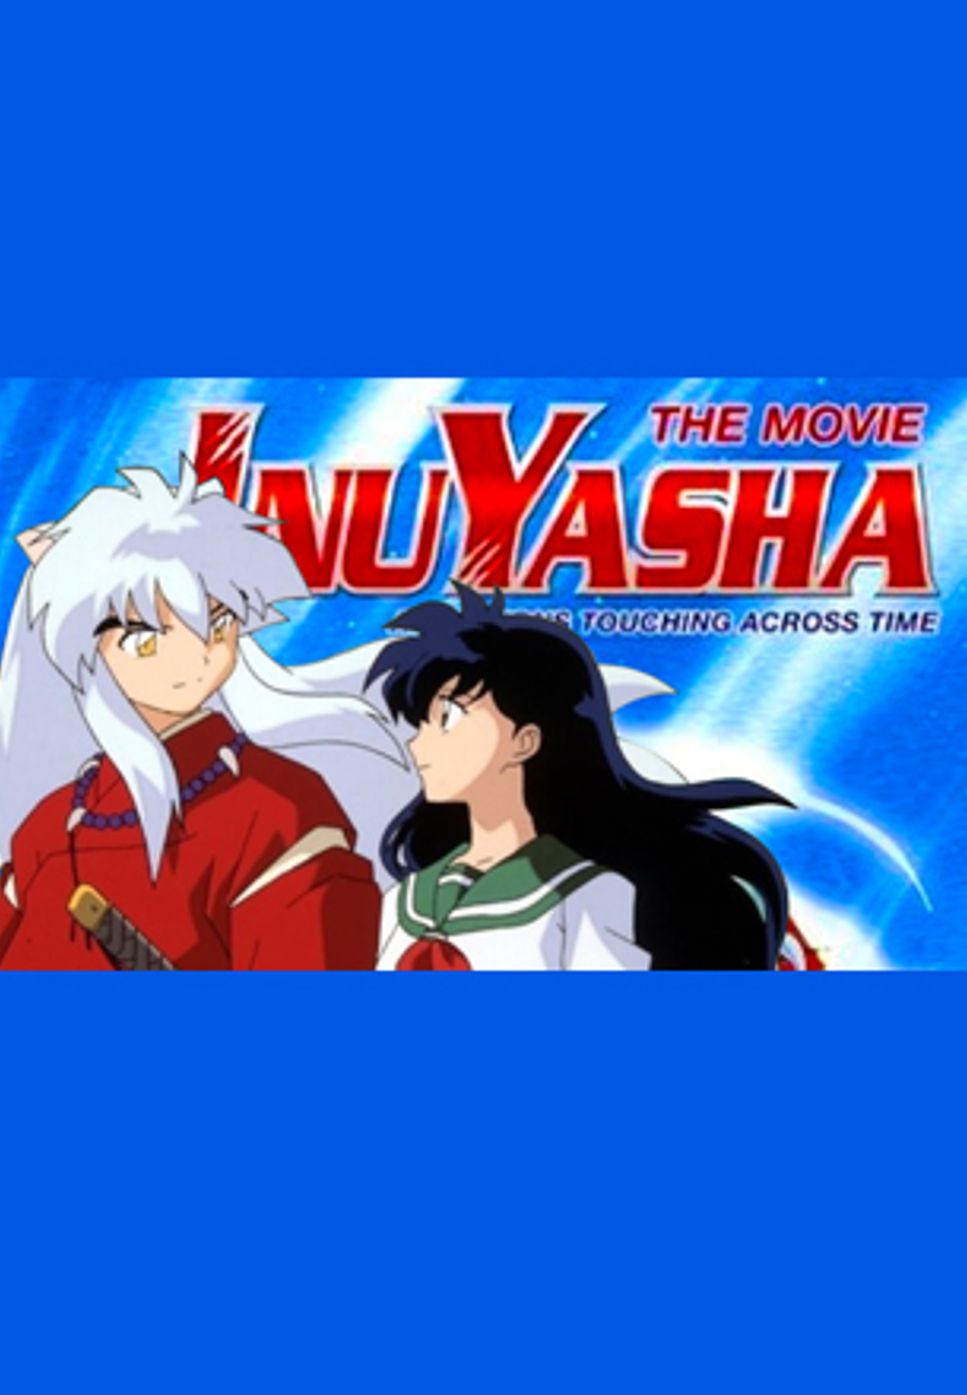 Inuyasha - Affections Touching Across Time by Day Kalimba